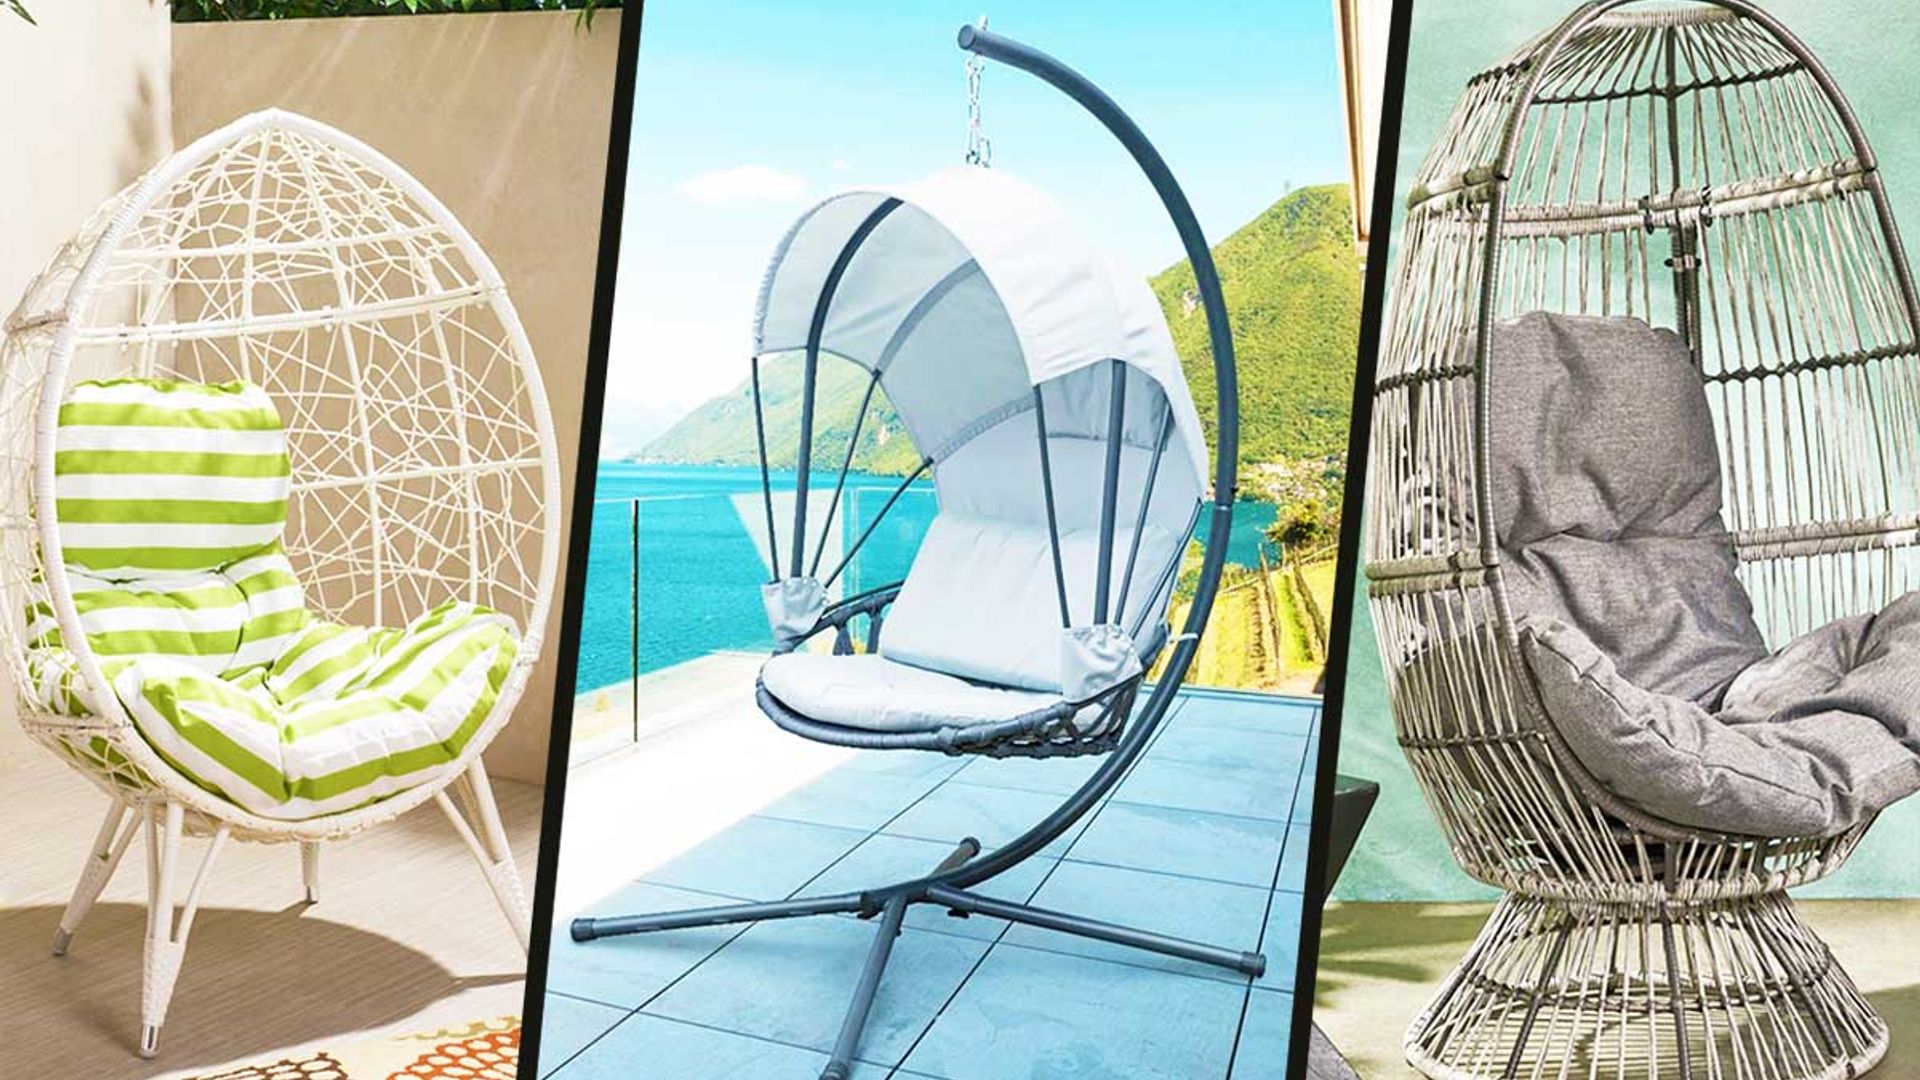 LG Outdoor Deluxe Housse-Egg Chair